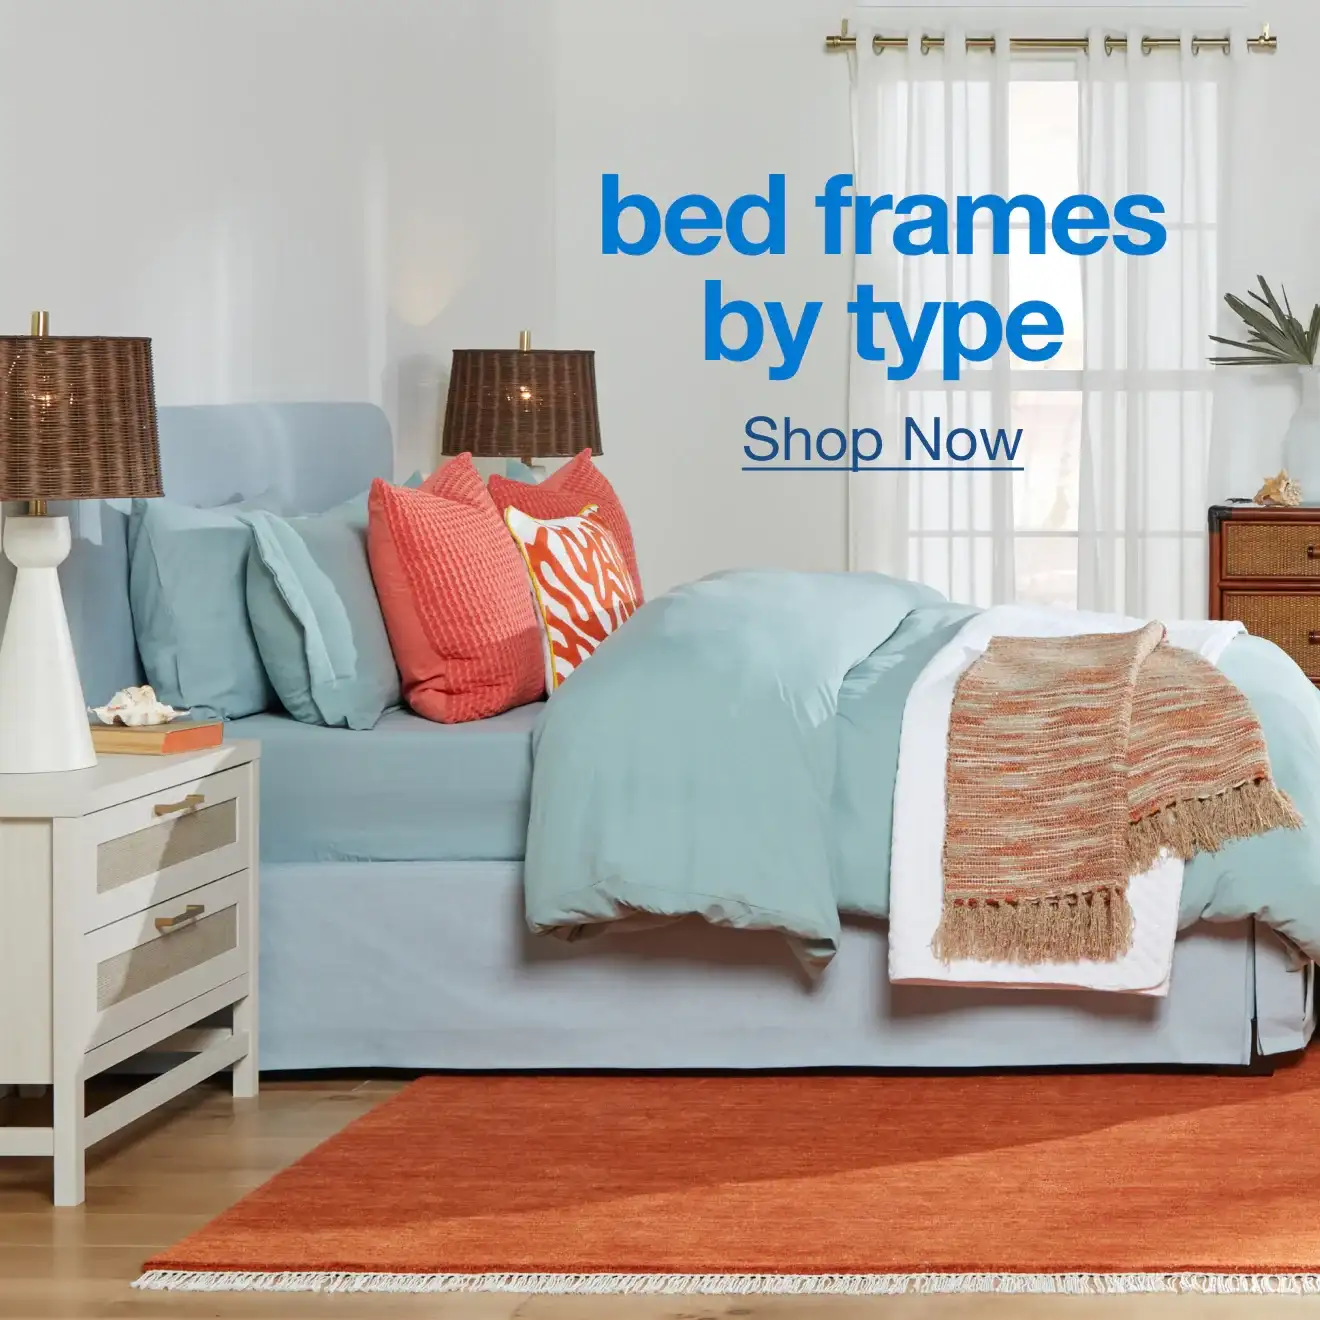 BED FRAMES BY TYPE